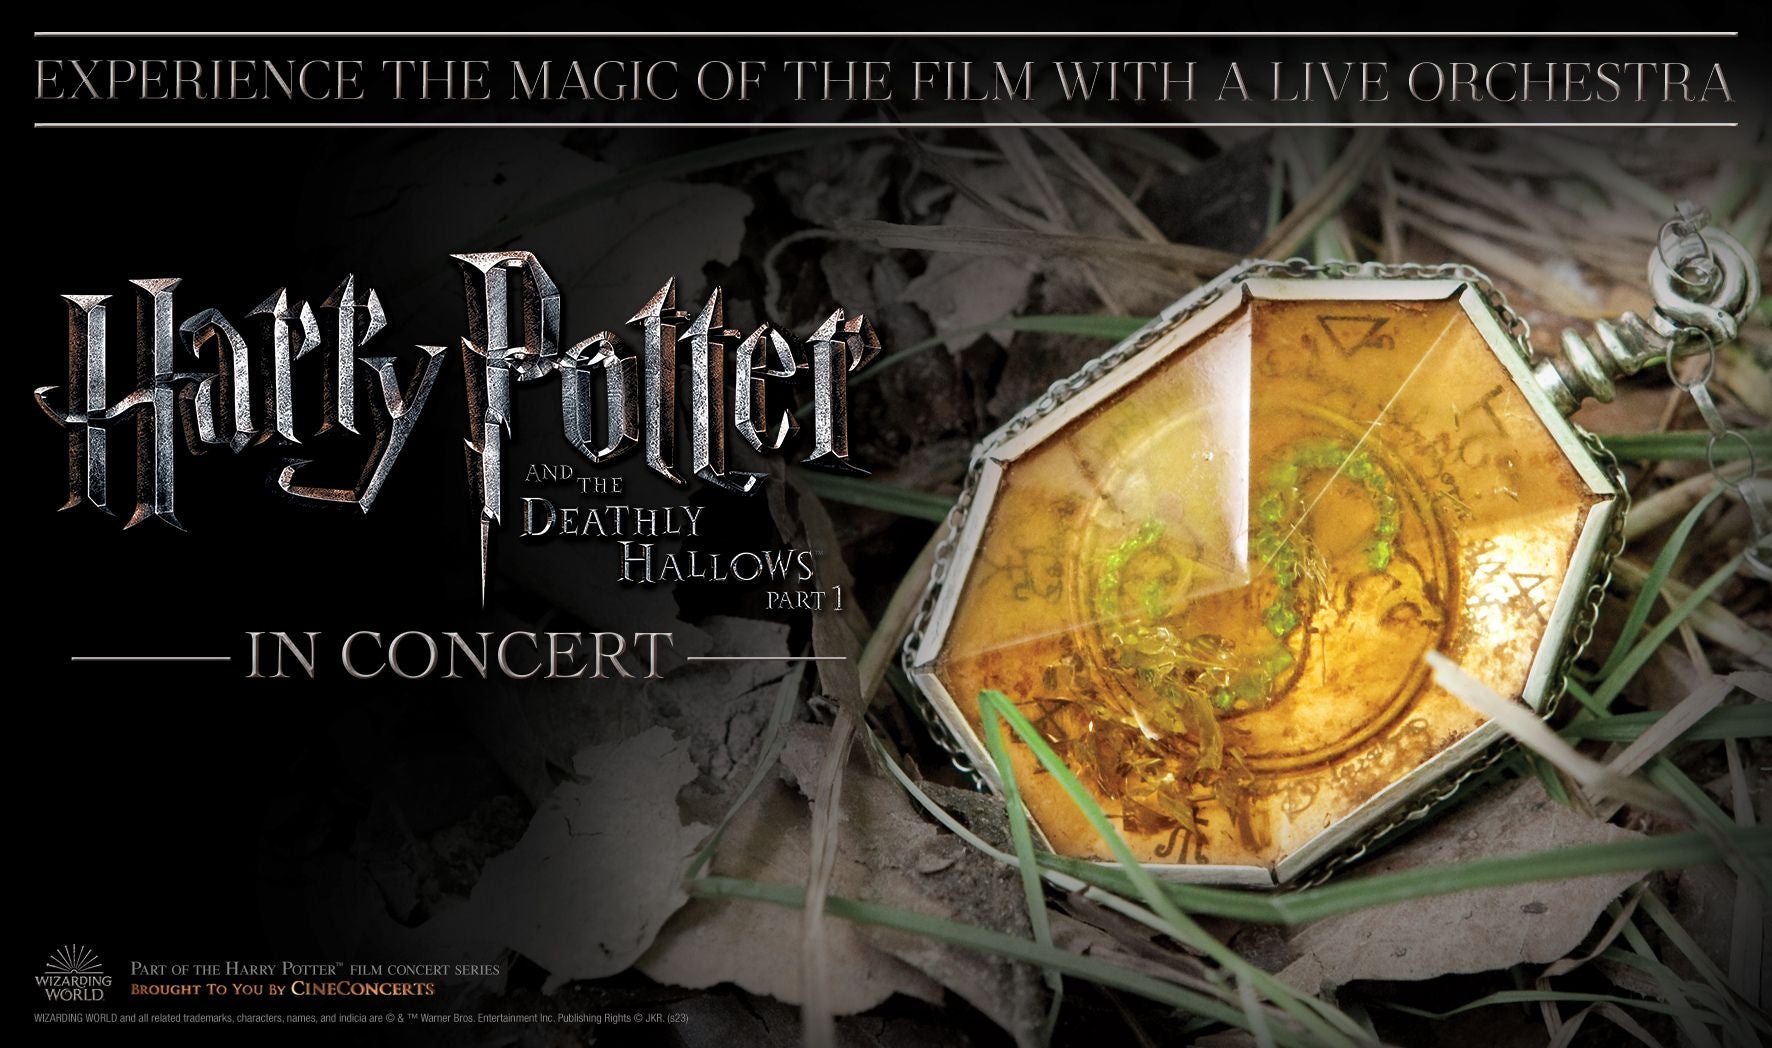 Harry Potter and the Deathly Hallows™ Part 1 in Concert